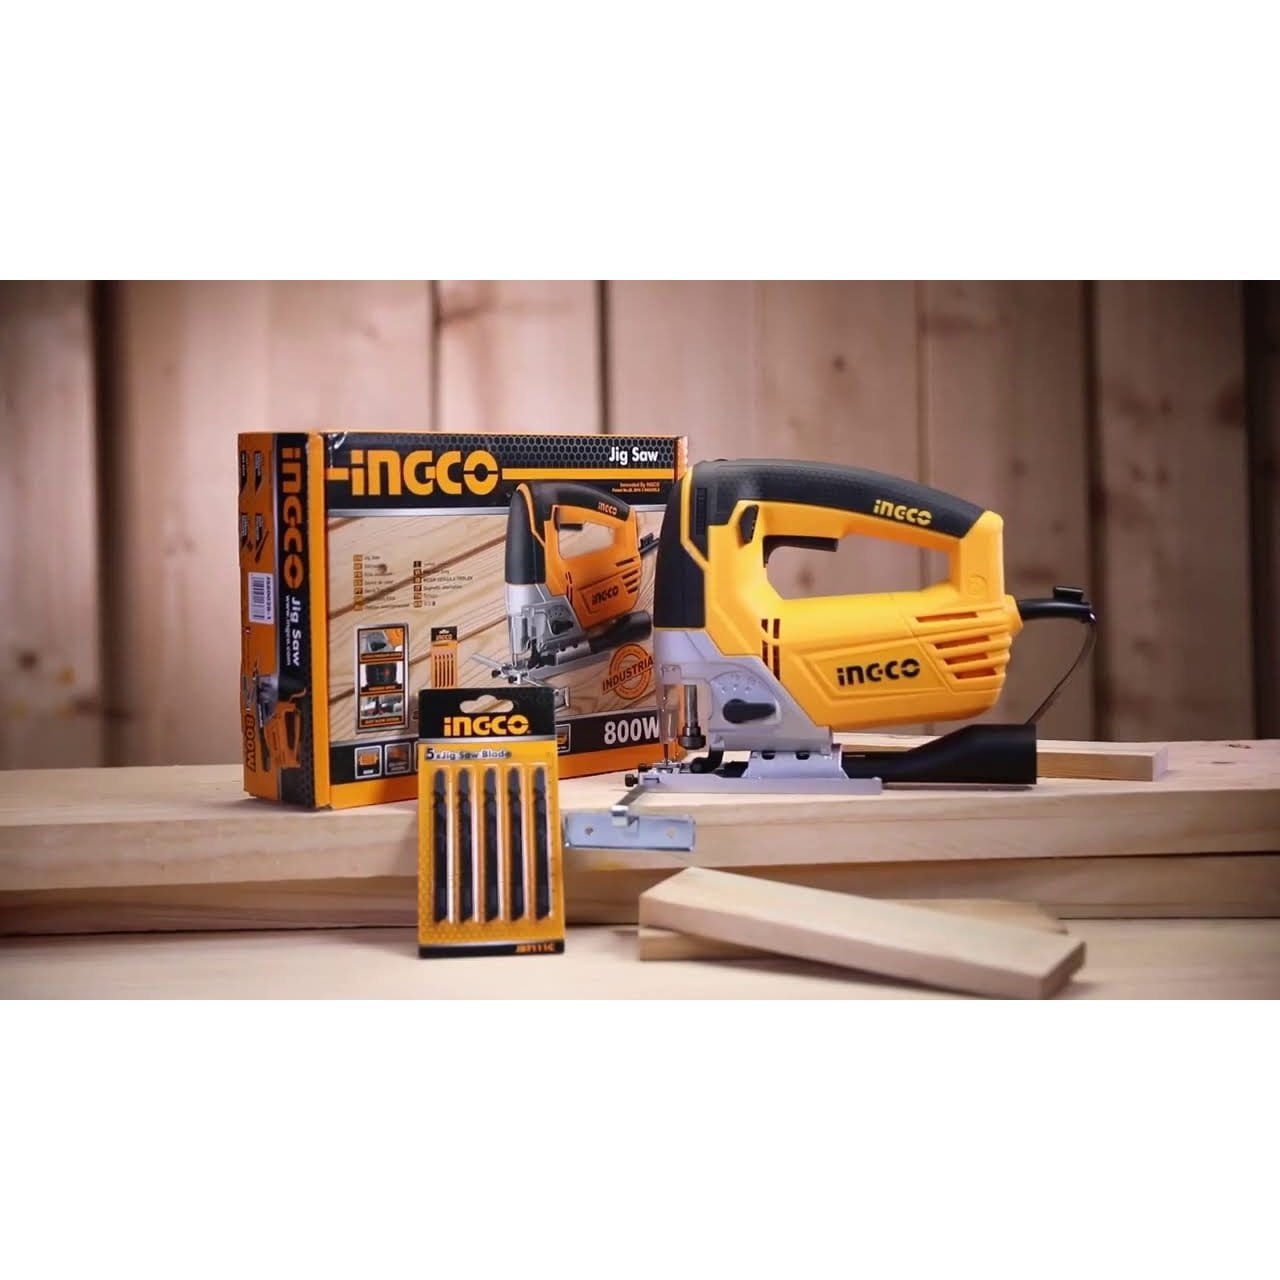 Ingco Jig Saw 800W - JS80068 | Buy Online in Accra, Ghana - Supply Master Jigsaw Buy Tools hardware Building materials